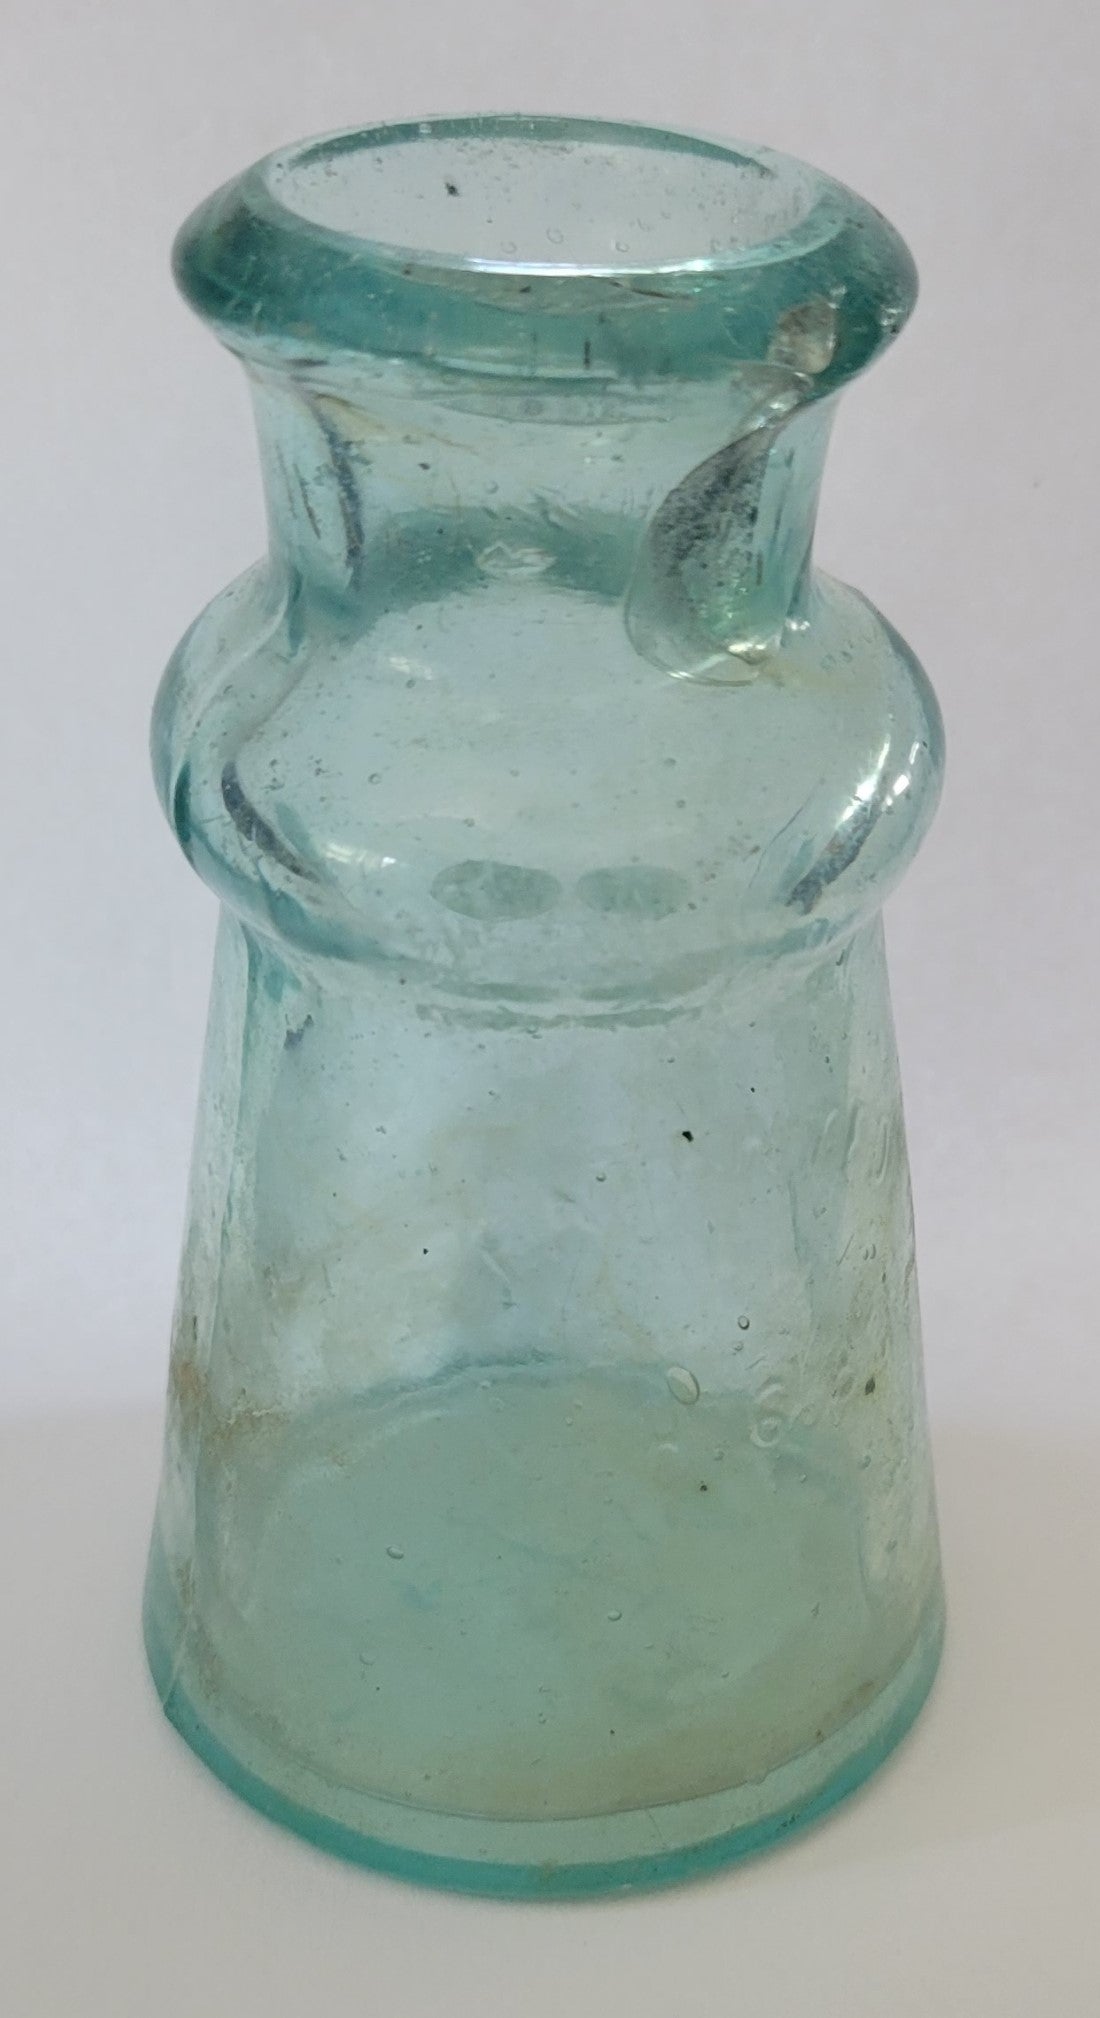 This thick aqua ink bottle was made by Bixby in 1883.  The bottom has the Bixby name and on the side is "Patented Mch. 6. 83" Front view.